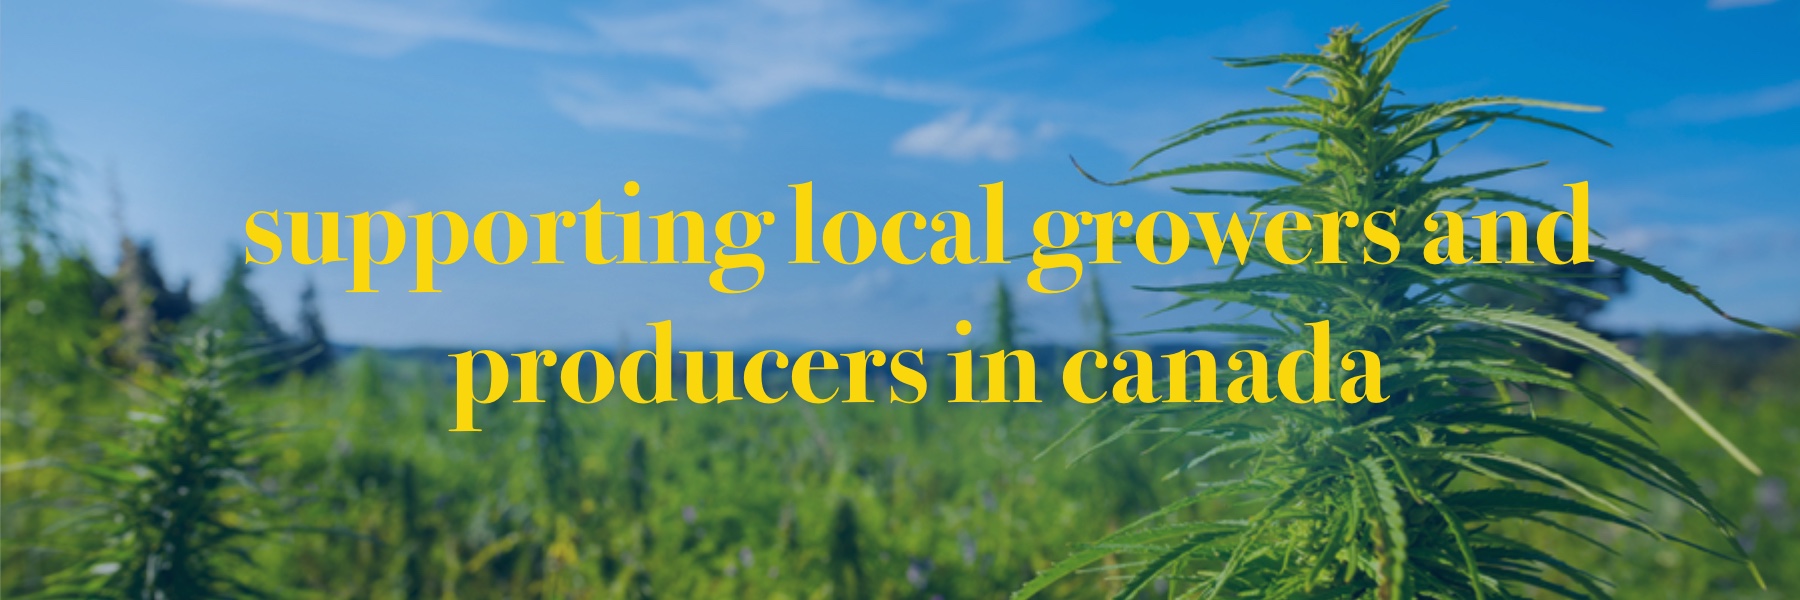 Supporting Local Growers and Producers in Canada